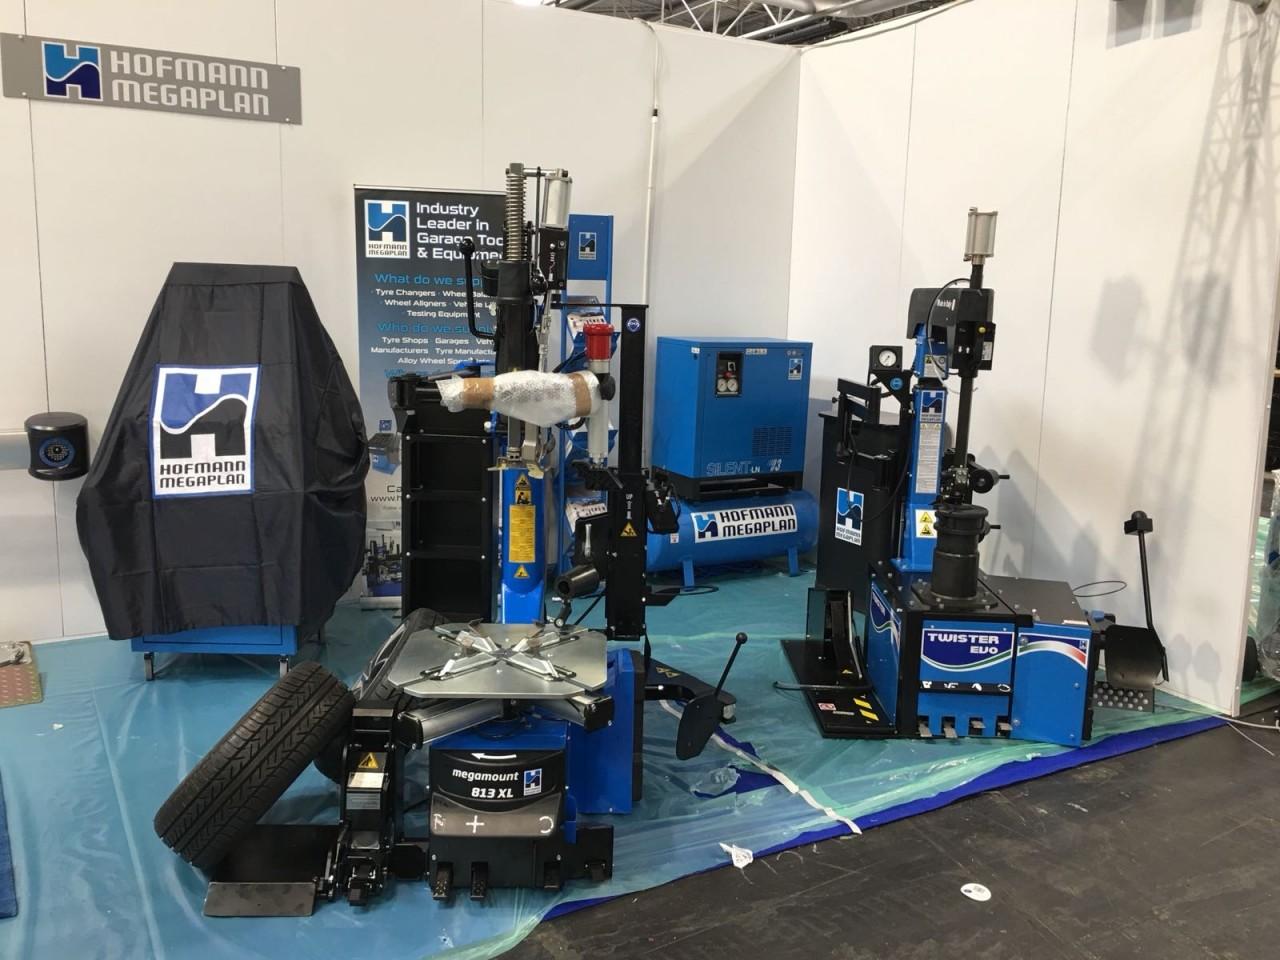 Tyre Equipment all ready for Automechanika 2018